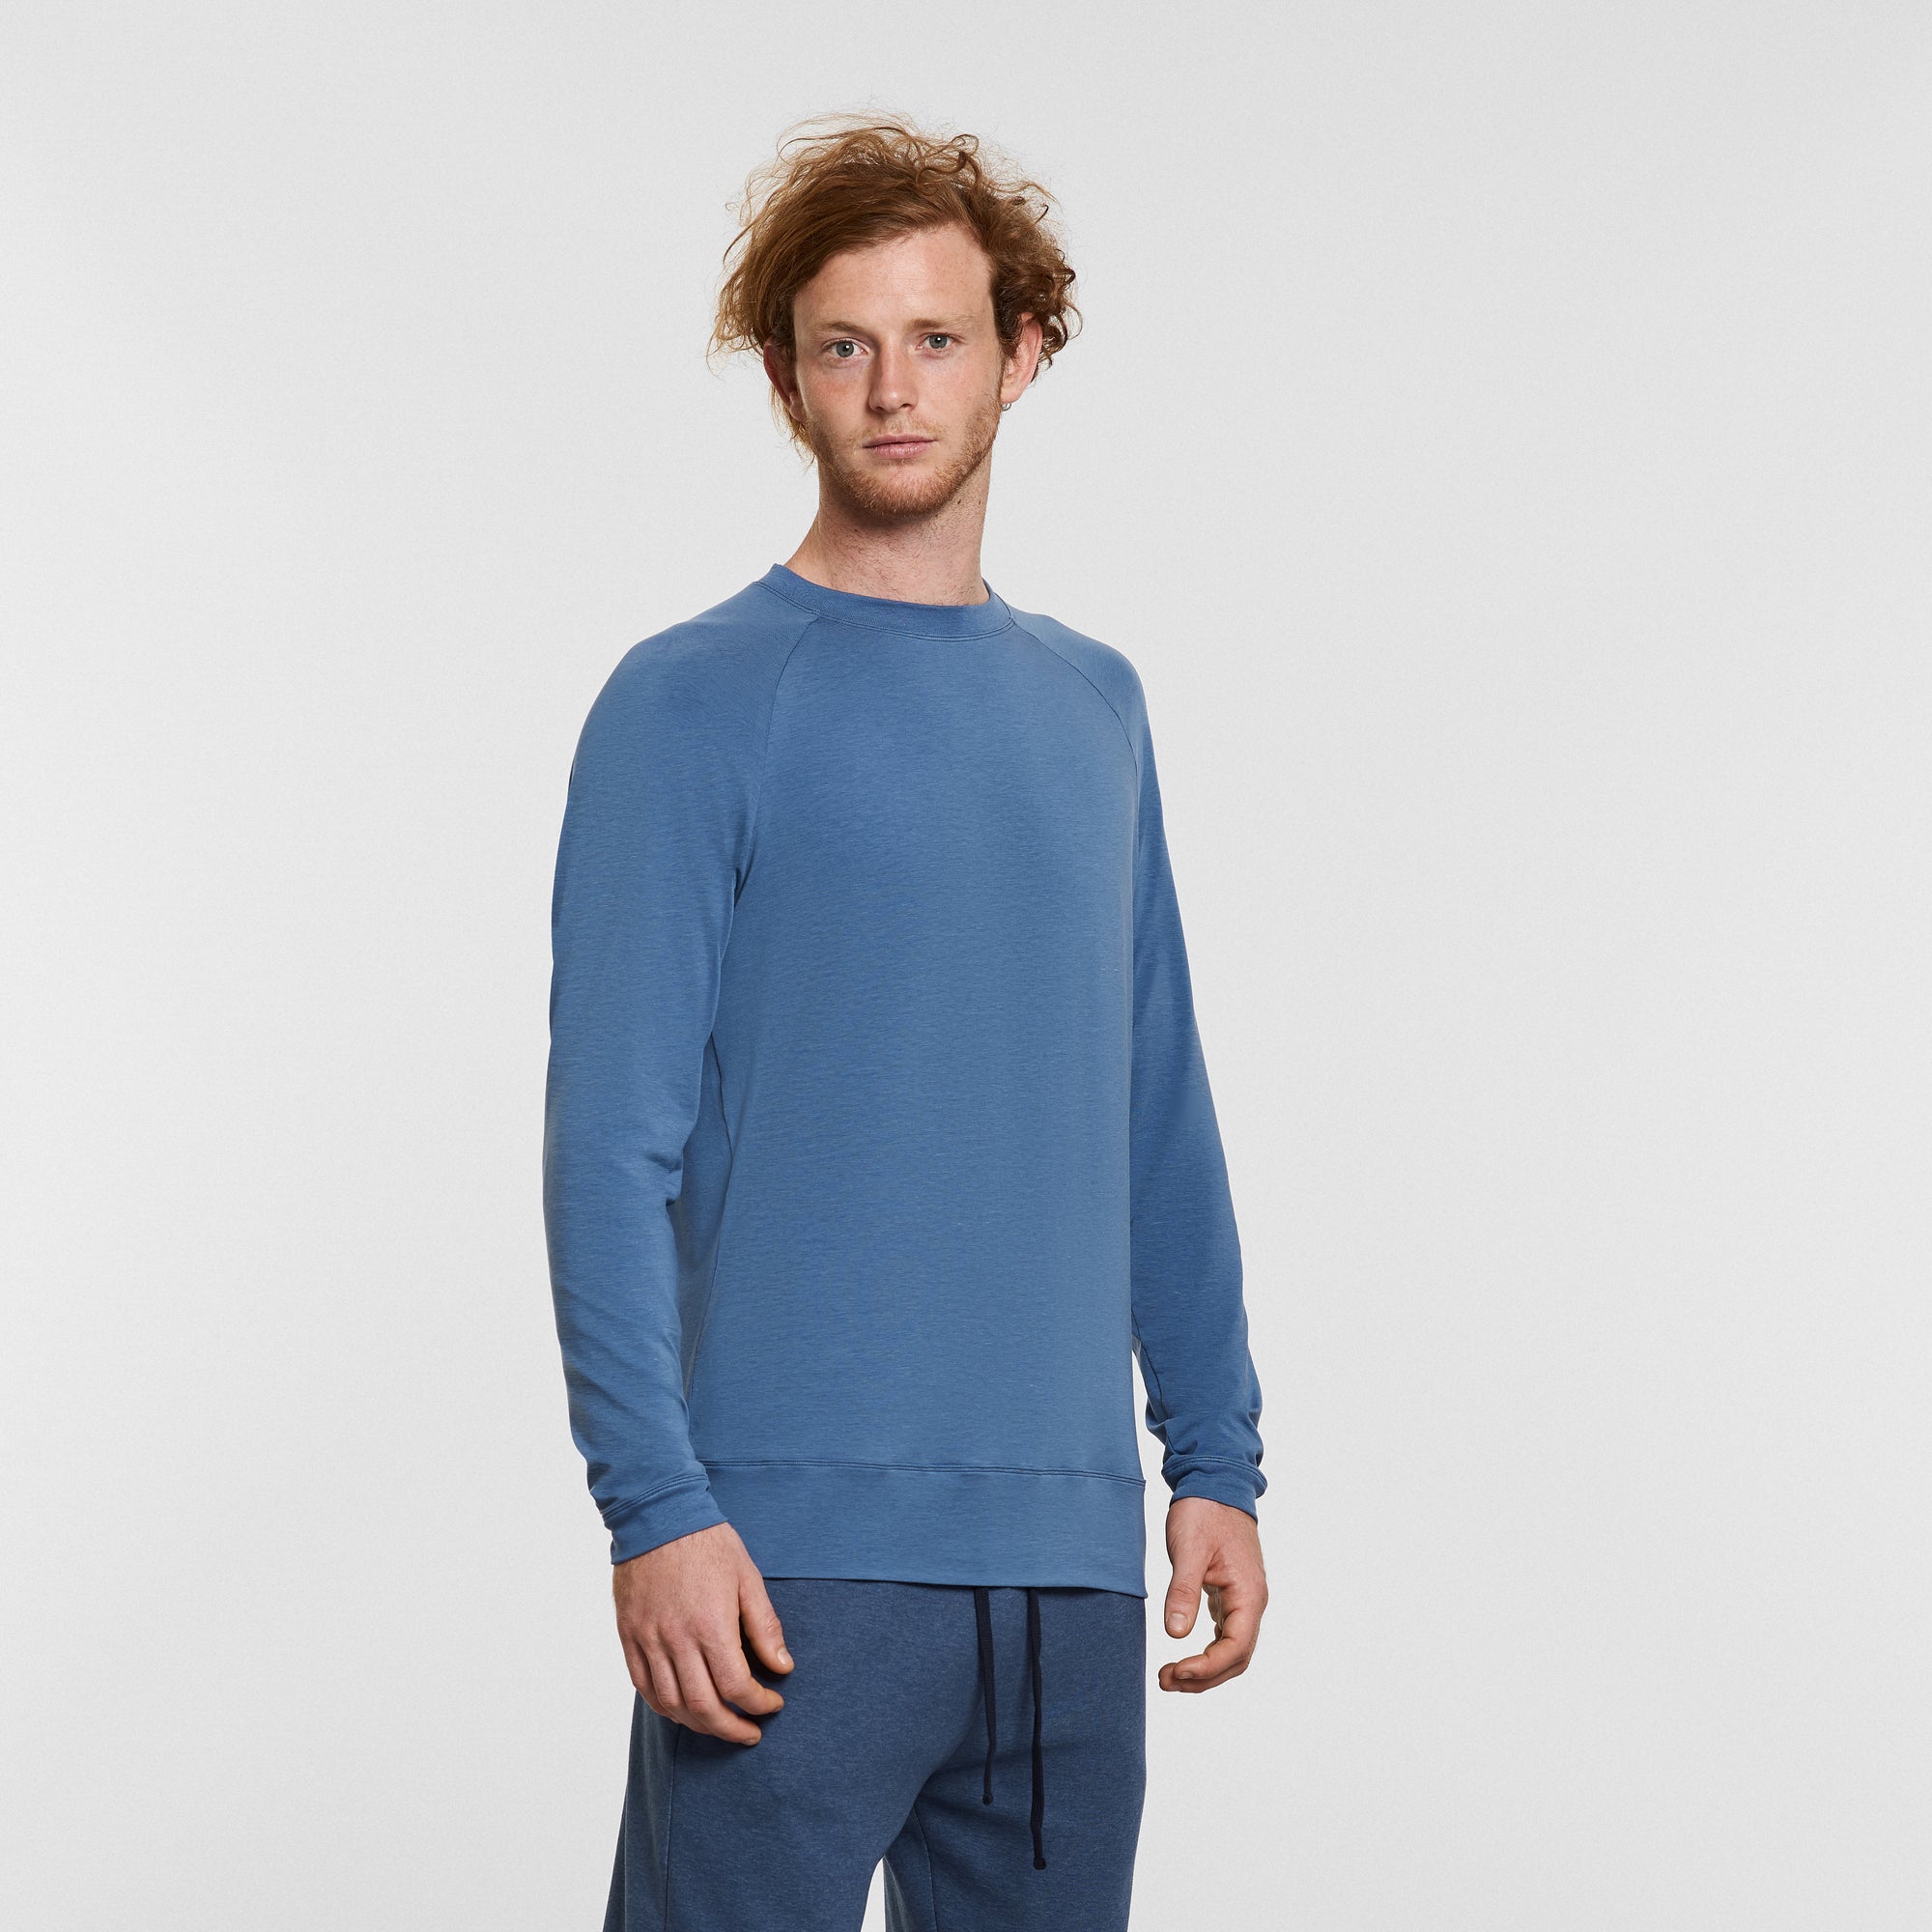 man wearing blue long sleeved yoga top by warrior addict 